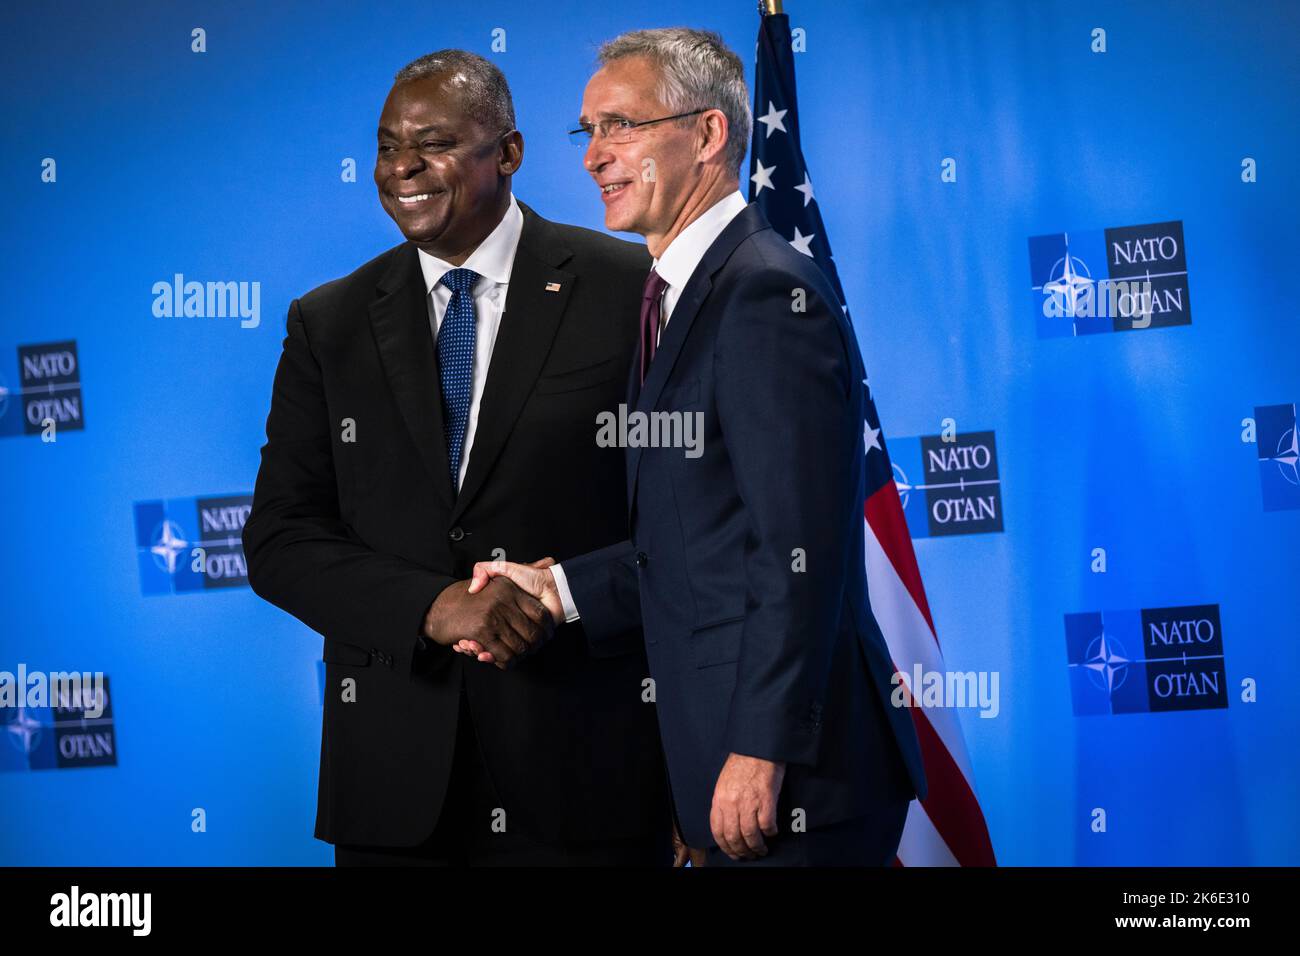 Brussels, Belgium. 13th Oct, 2022. U.S. Secretary of Defense Lloyd J. Austin III, left, shakes hands with NATO Secretary General Jens Stoltenberg on the sidelines of the NATO Defense Ministerial, October 13, 2022 in Brussels, Belgium. Credit: Chad J. McNeeley/DOD/Alamy Live News Stock Photo